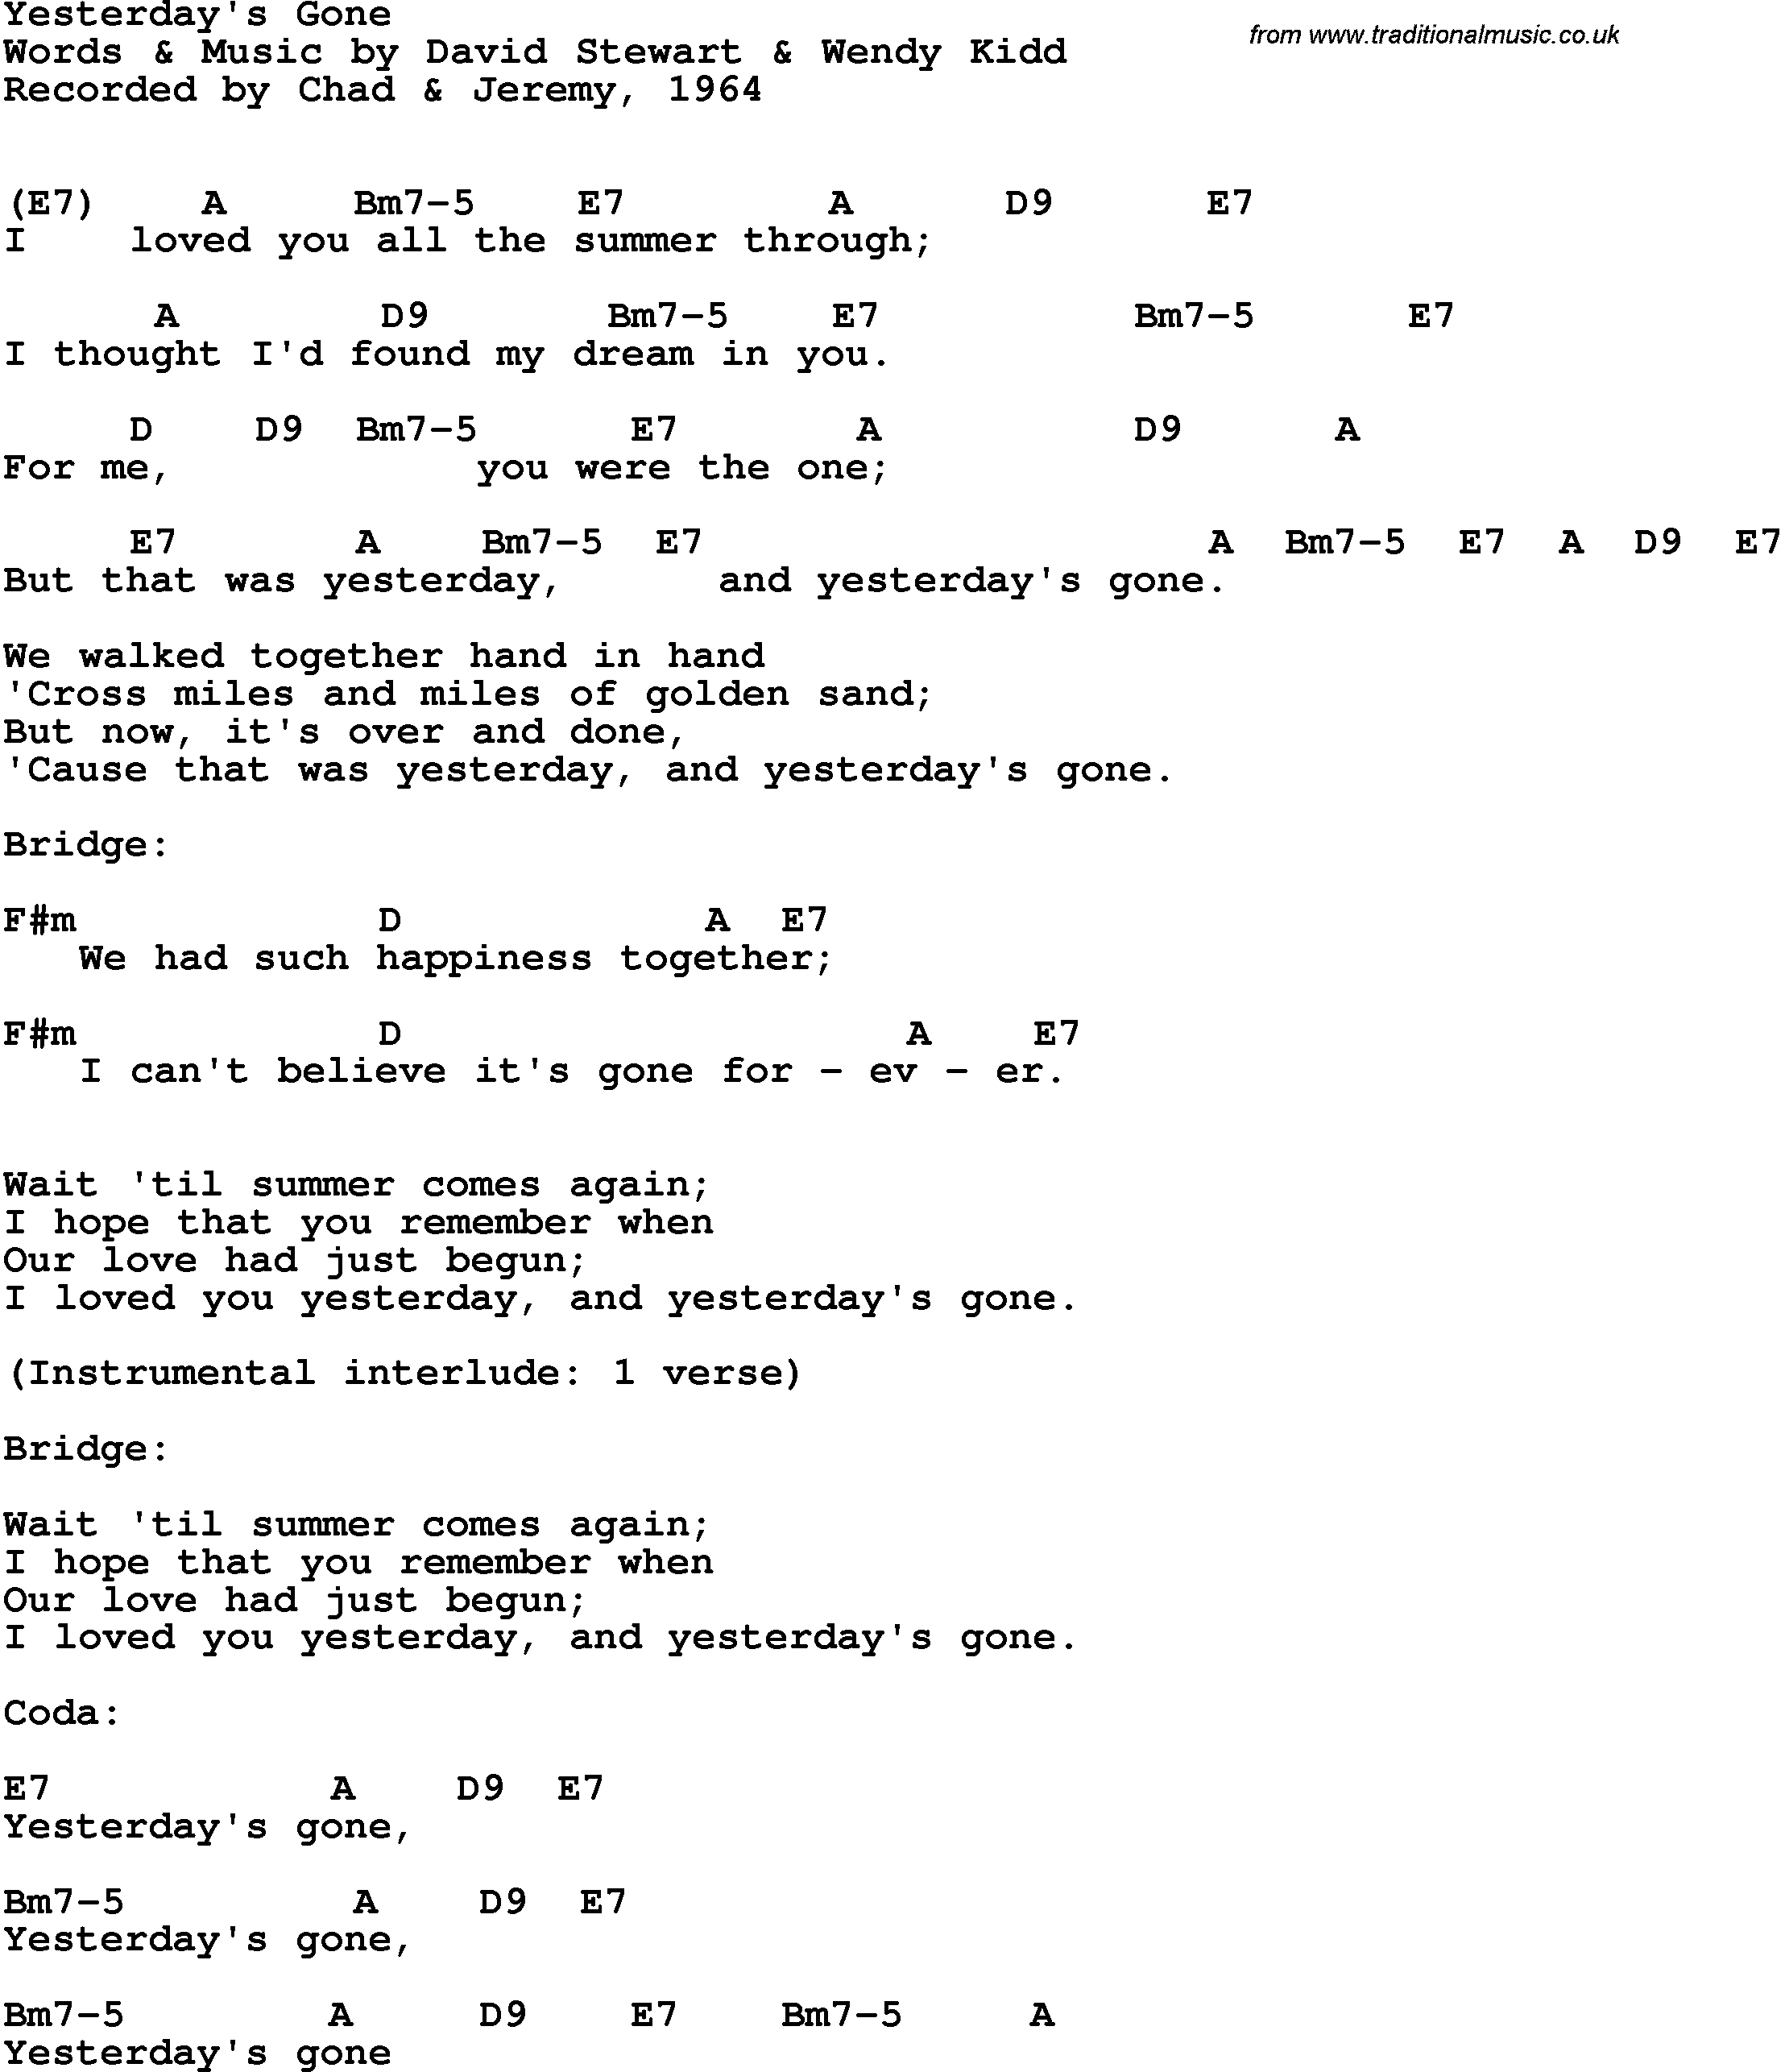 Song Lyrics with guitar chords for Yesterday's Gone - Chad & Jeremy, 1964